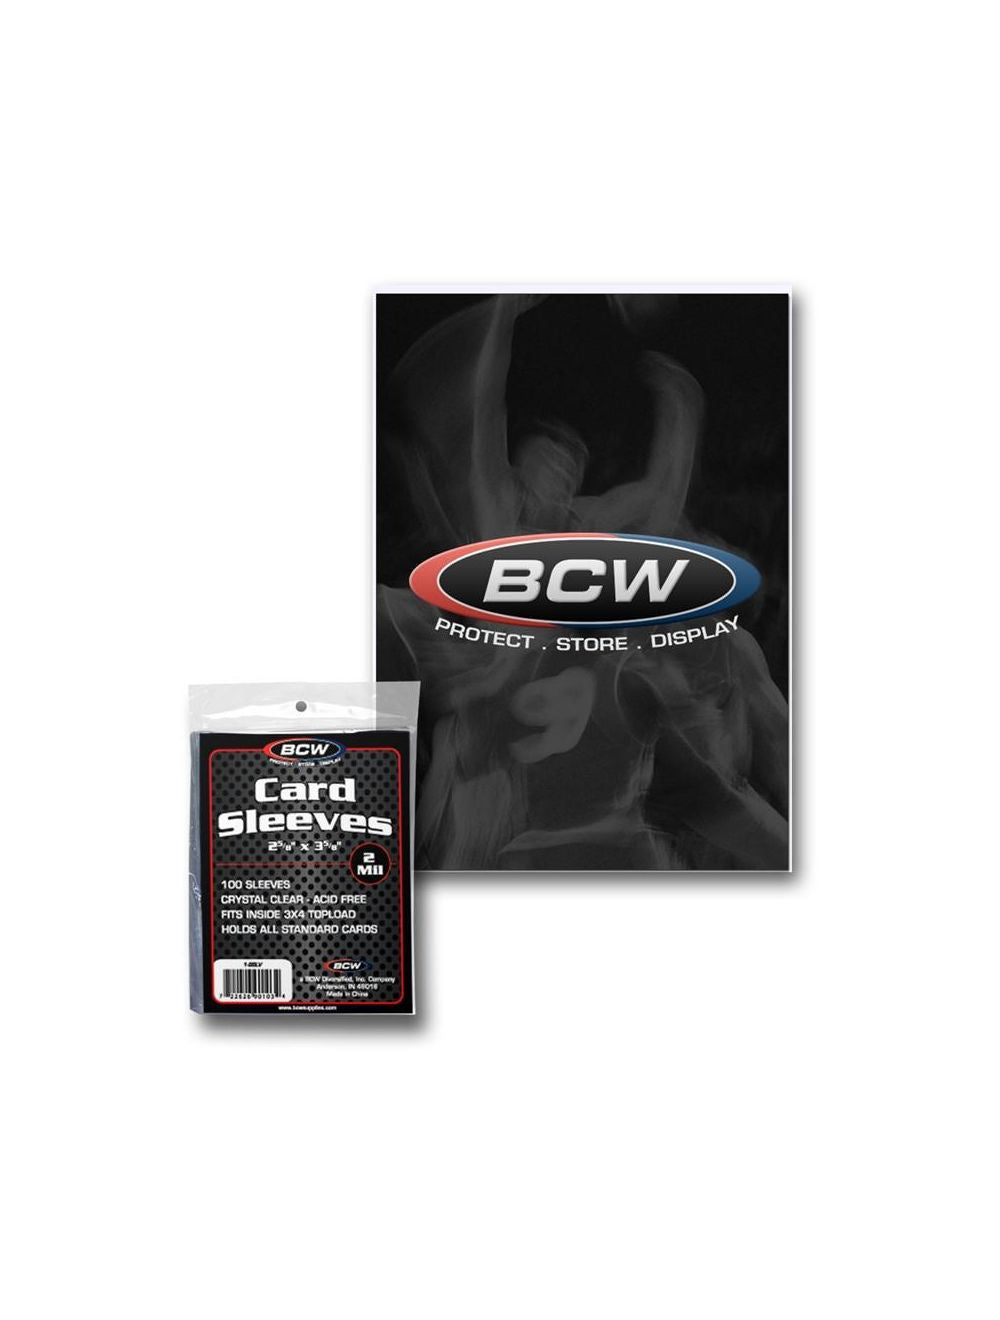 BCW STANDARD CLEAR SLEEVES (100 COUNT)